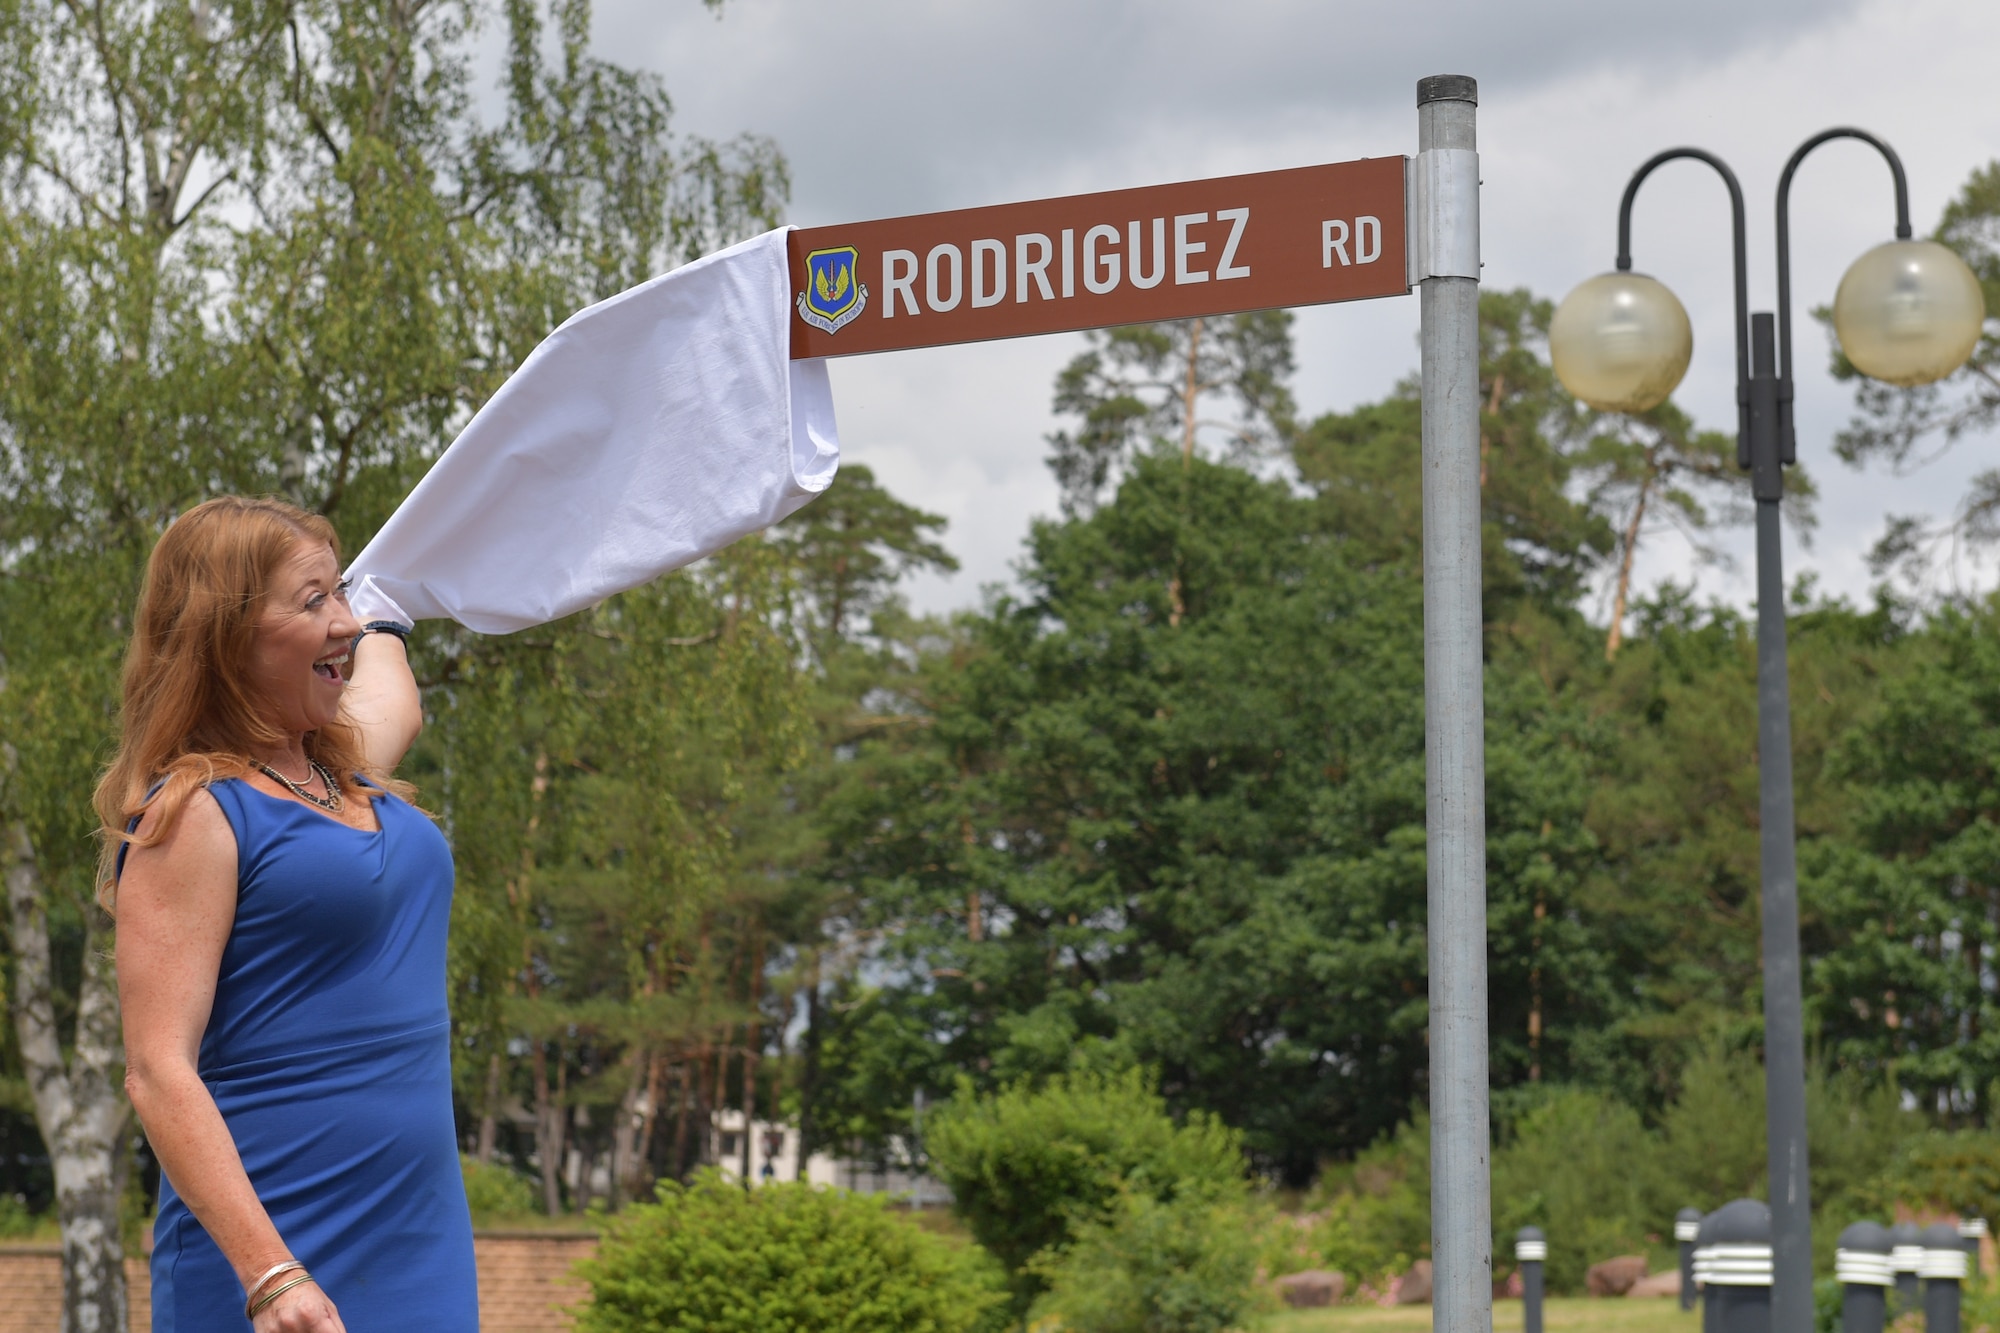 A person pulling a cloth cover off of a road sign.